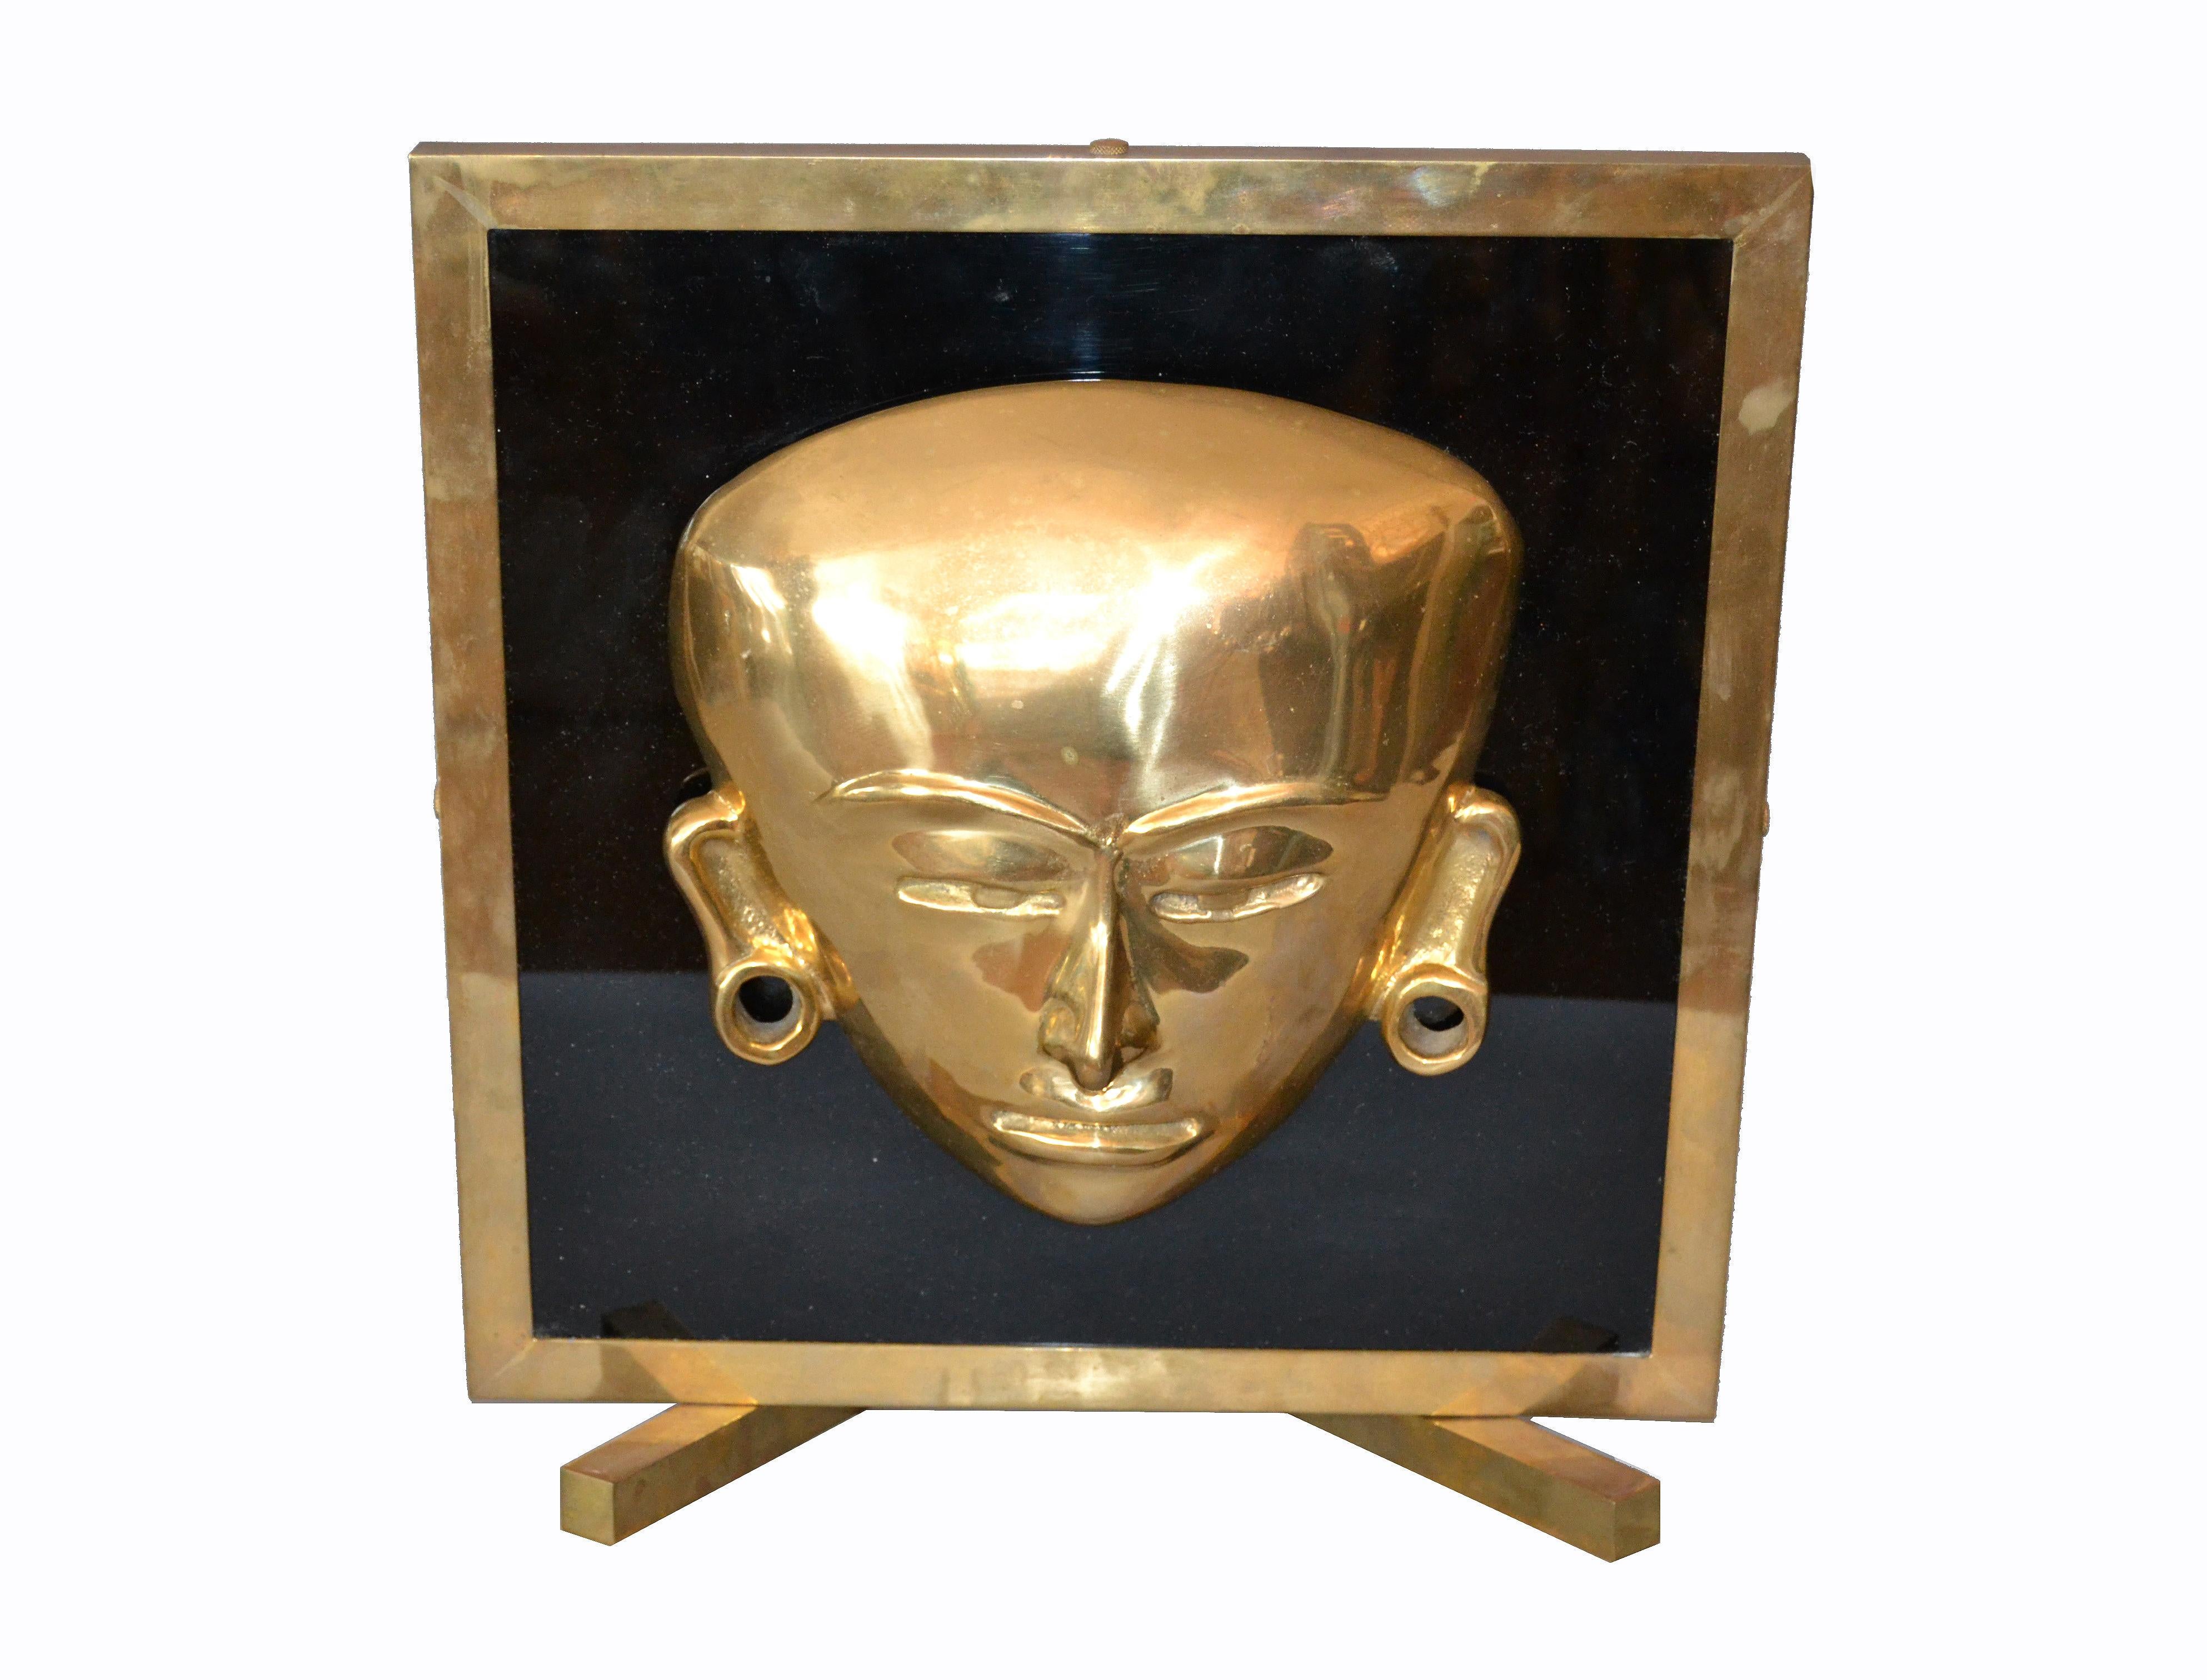 Decorative bronze framed brass African mask on black glass table art.
No markings.
It is very heavy and shows a warm patina.